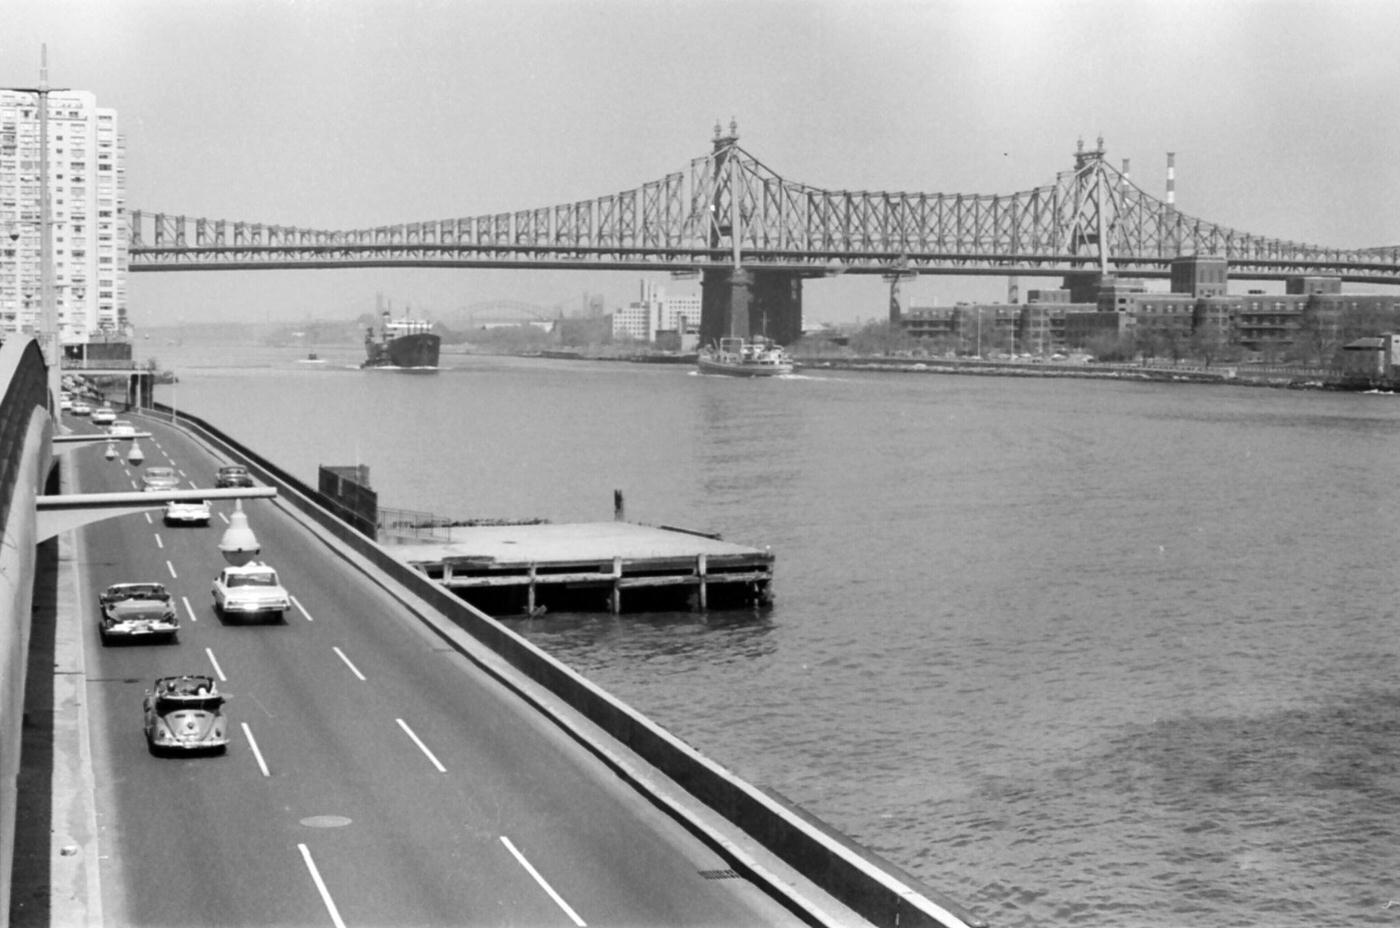 A View Of Cars On The Fdr Drive With The Manhattan Bridge In The Background In Manhattan, 1965.